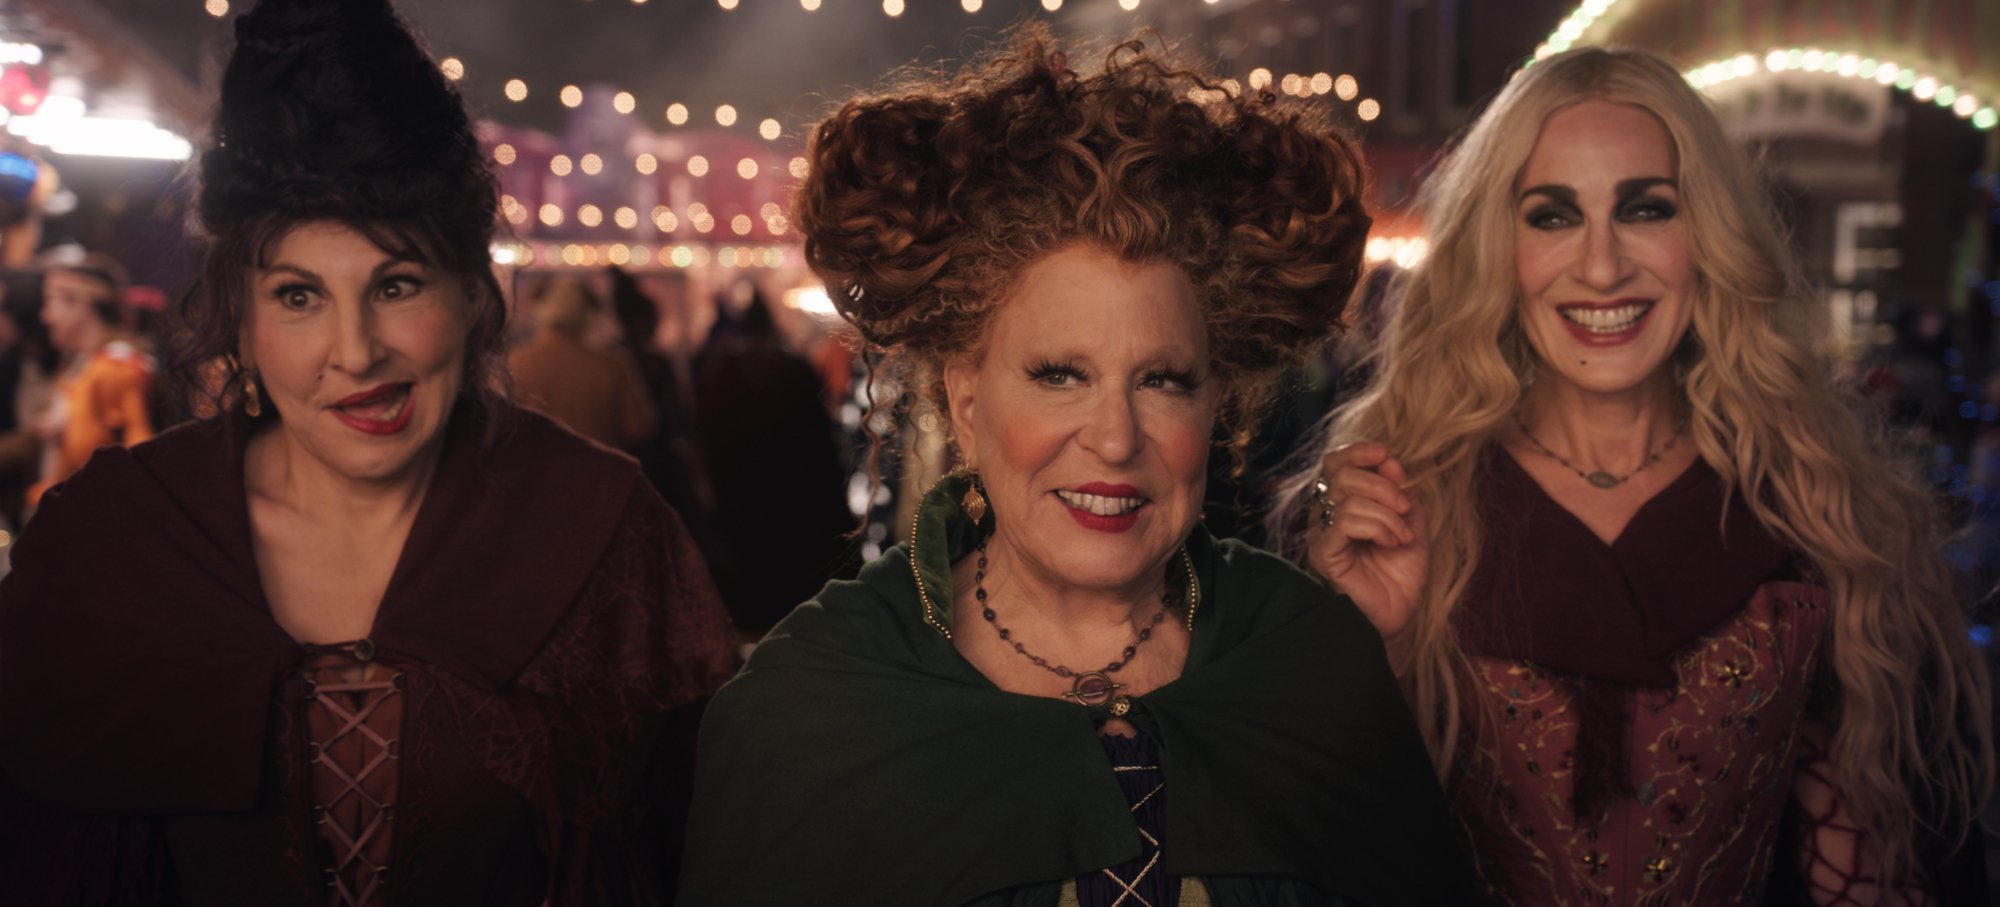 'Hocus Pocus 2' Kathy Najimy as Mary, Bette Midler as Winifred, and Sarah Jessica Parker as Sarah, which fans are boycotting over tweets, wearing witch costumes and smiling in front of a crowd of people